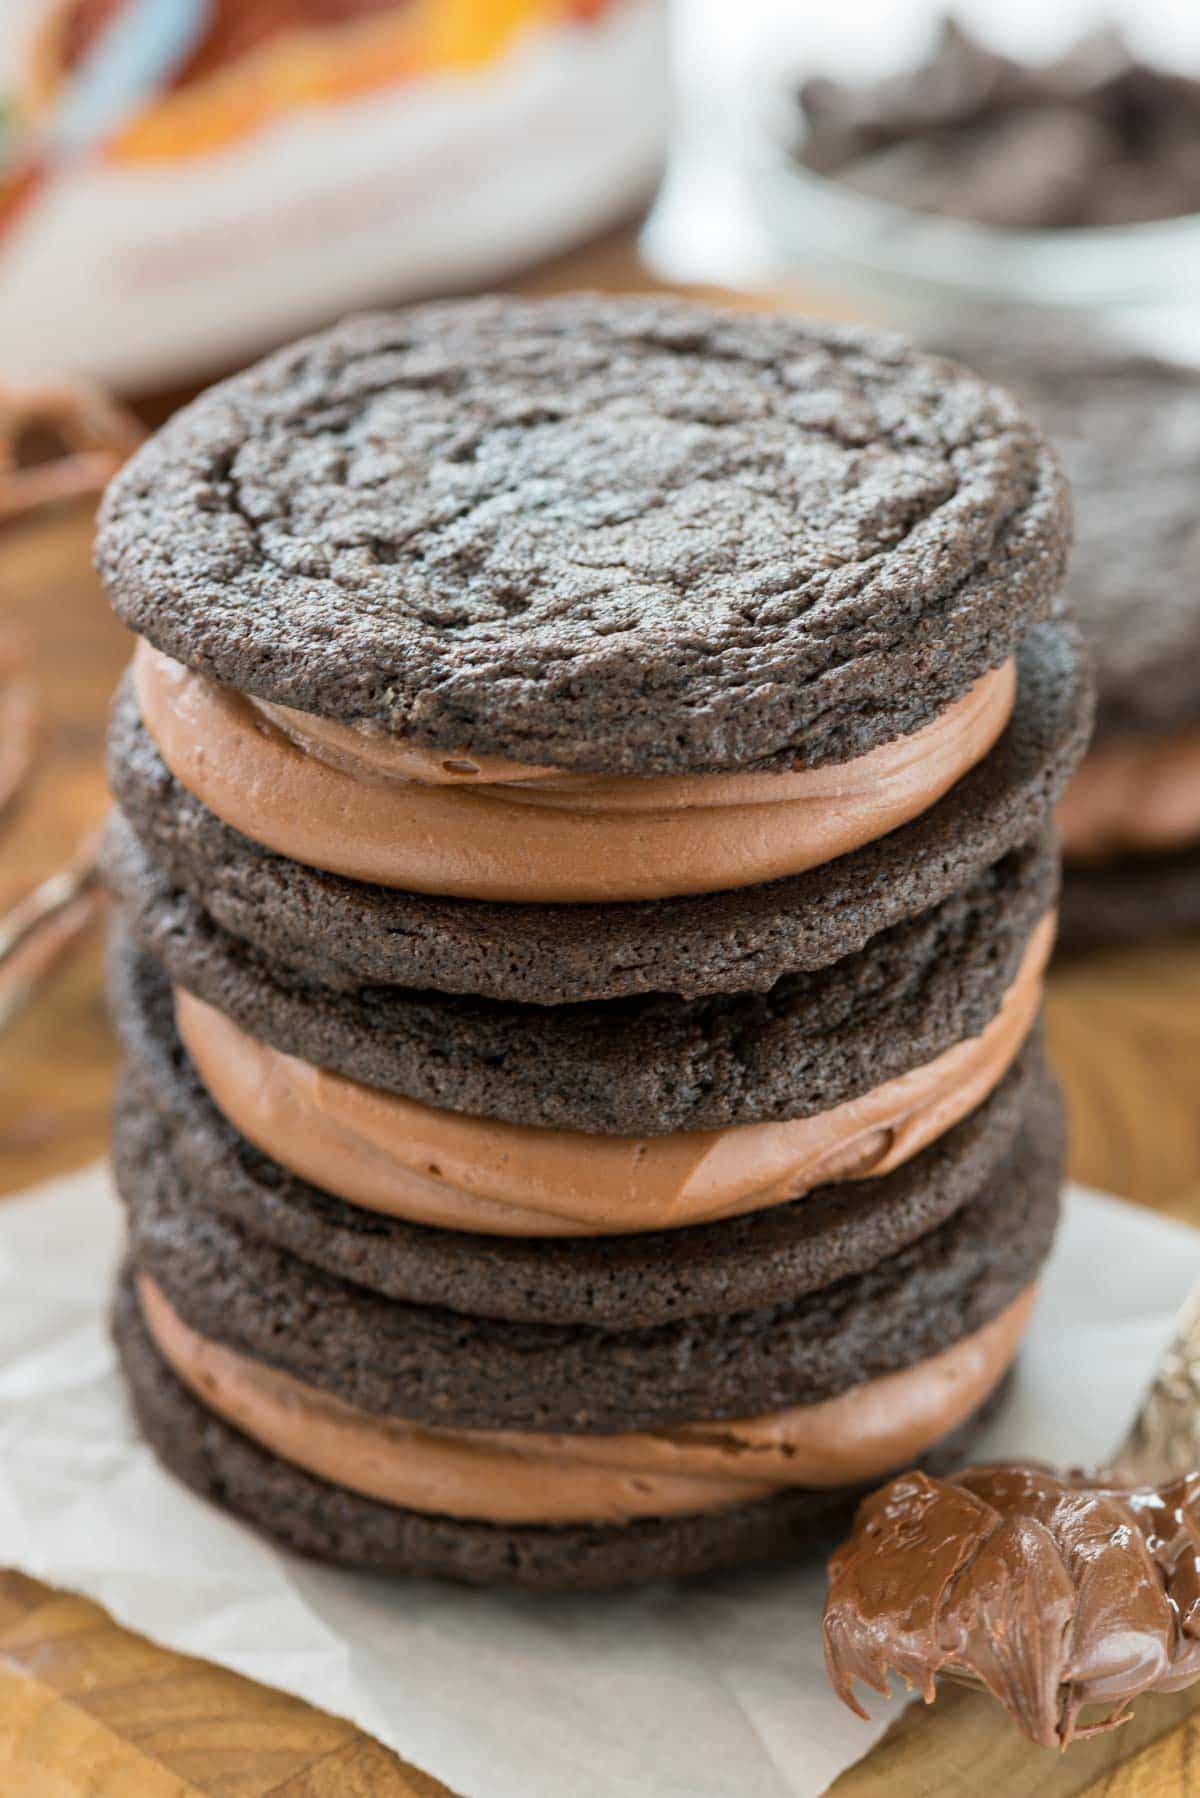 Homemade Nutella Oreos - this easy cookie recipe tastes JUST like an Oreo! Filled with the BEST Nutella frosting recipe, the cookie sandwiches are the BEST ever!